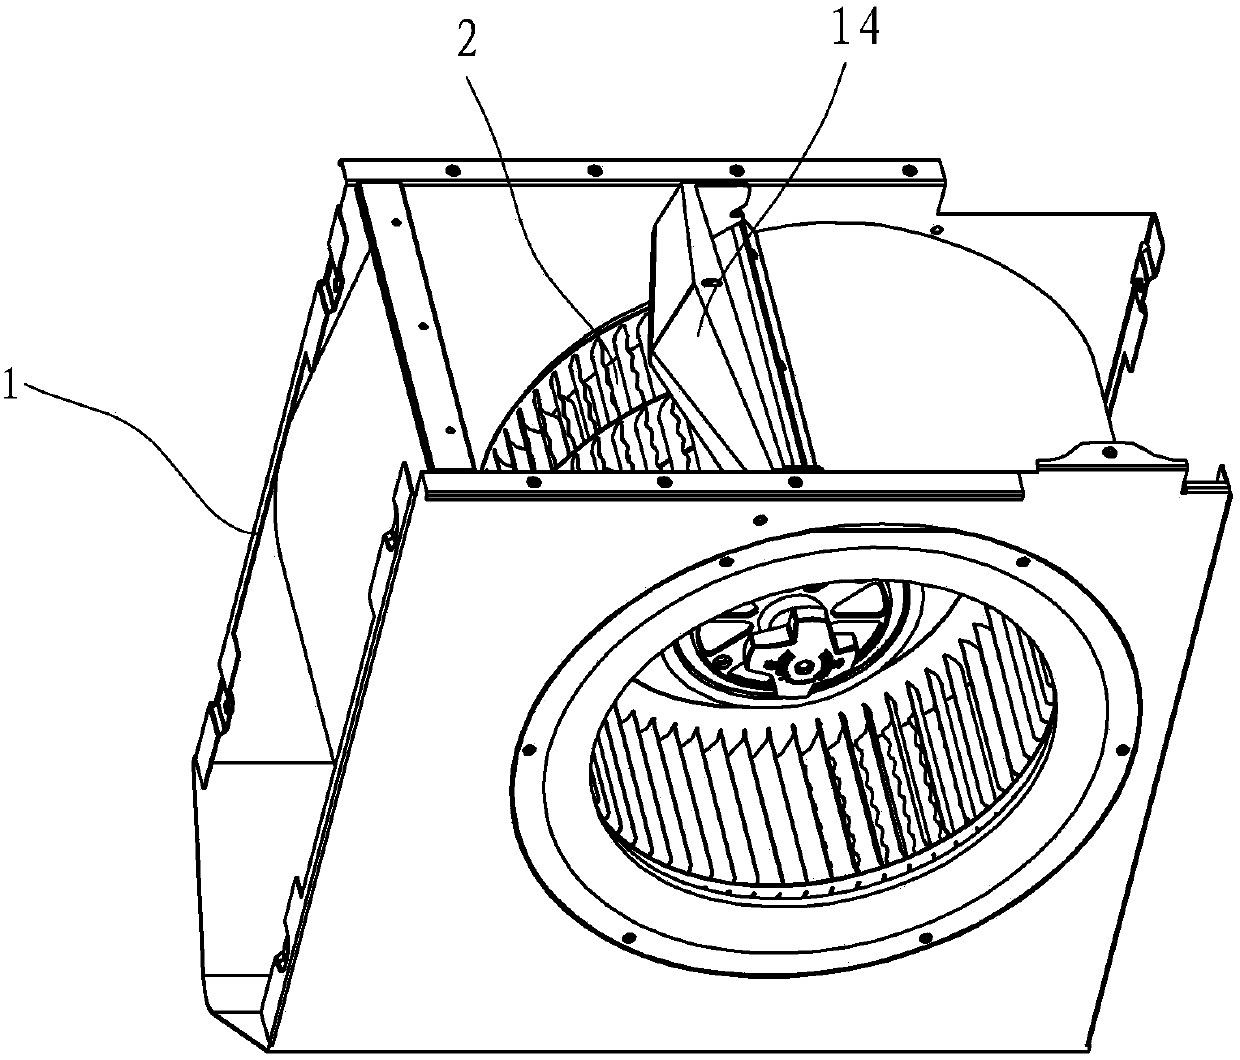 Range hood centrifugal fan with double air inlet structure